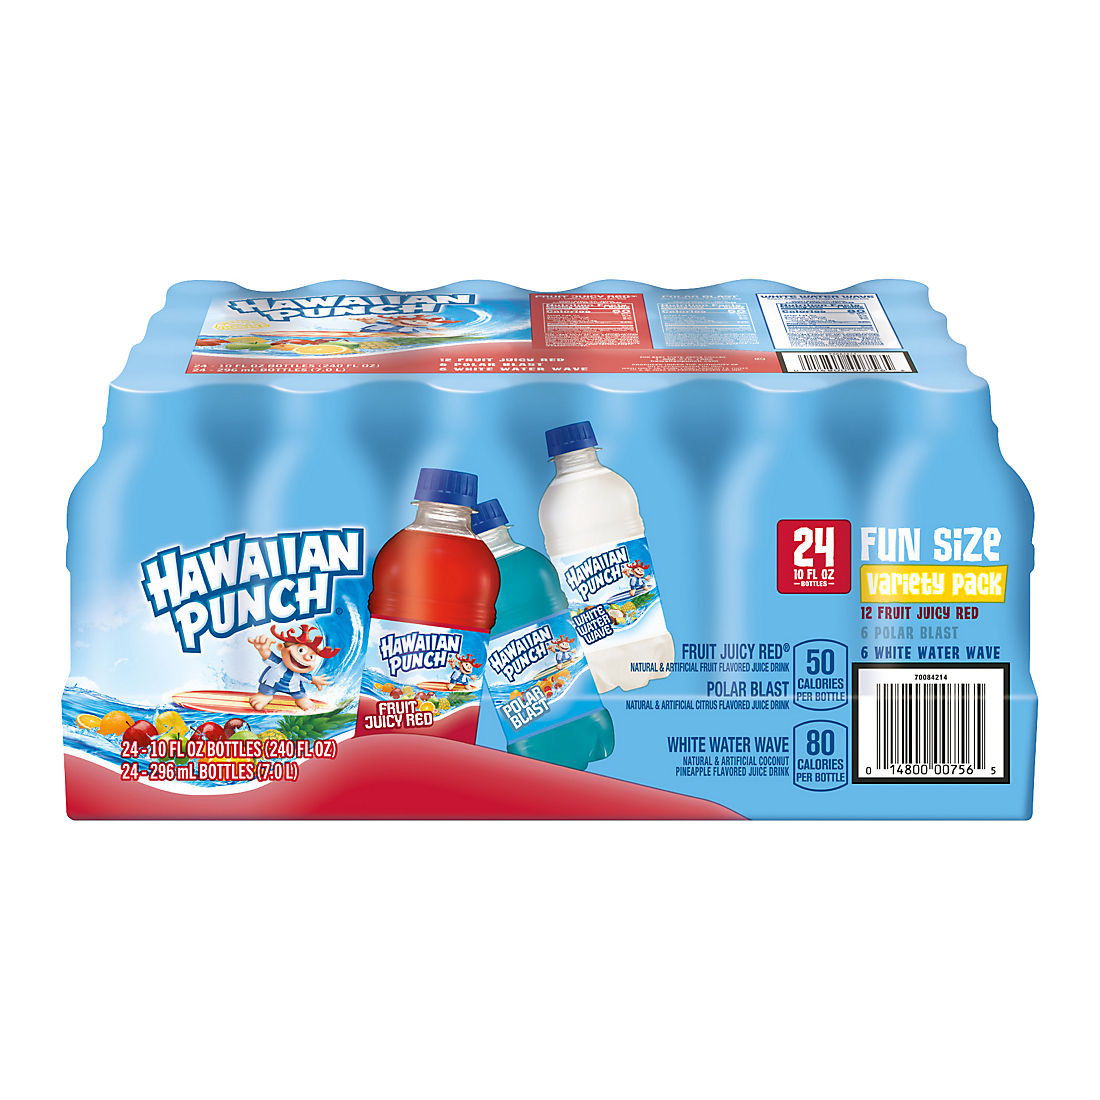 Hawaiian Punch Red White and Blue Variety Pack Bottles